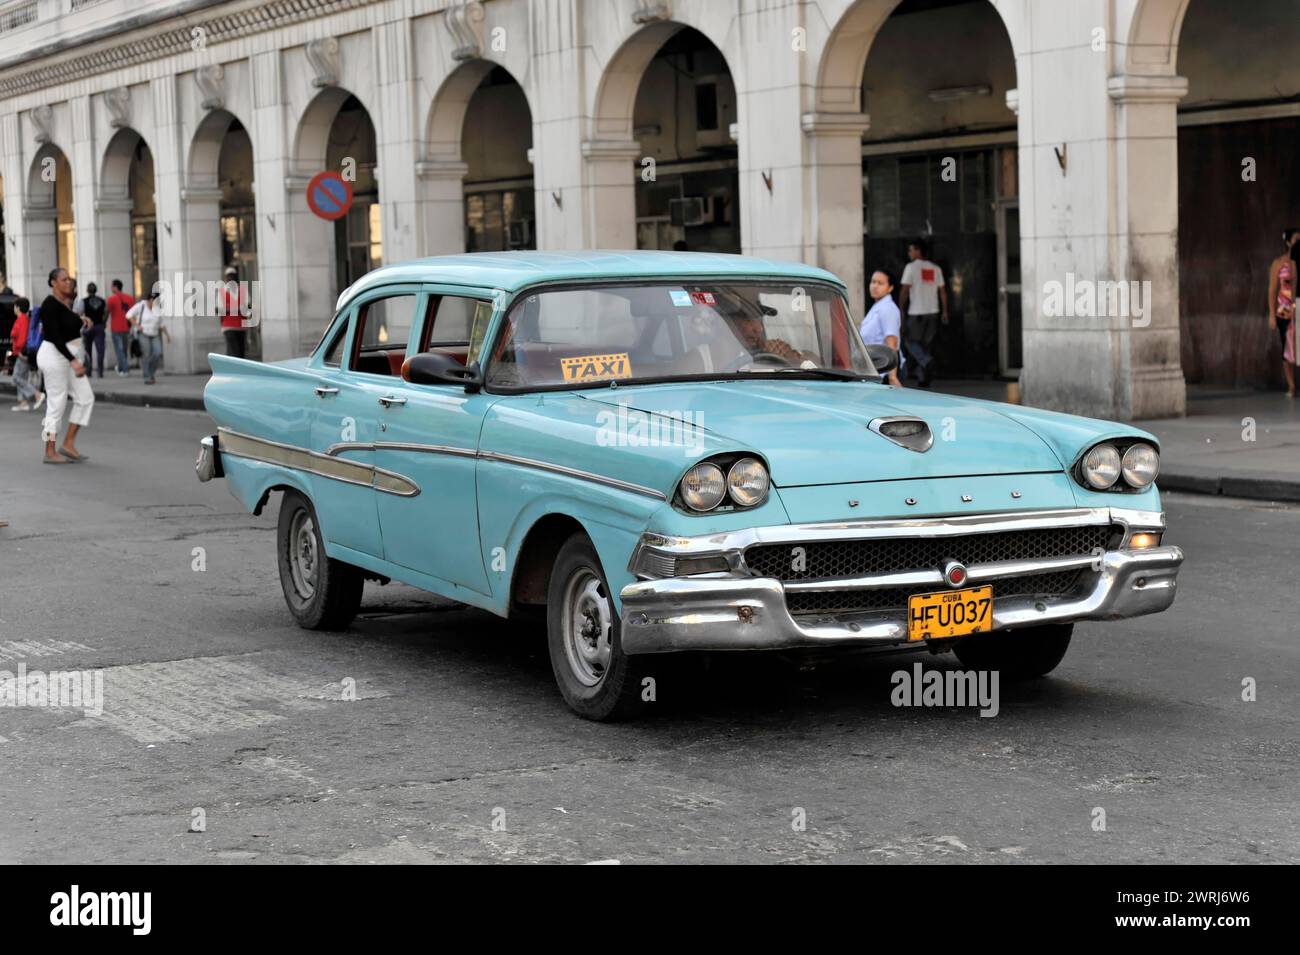 Light blue vintage car as a taxi on a busy street with passers-by in the background, Havana, Cuba, Central America Stock Photo